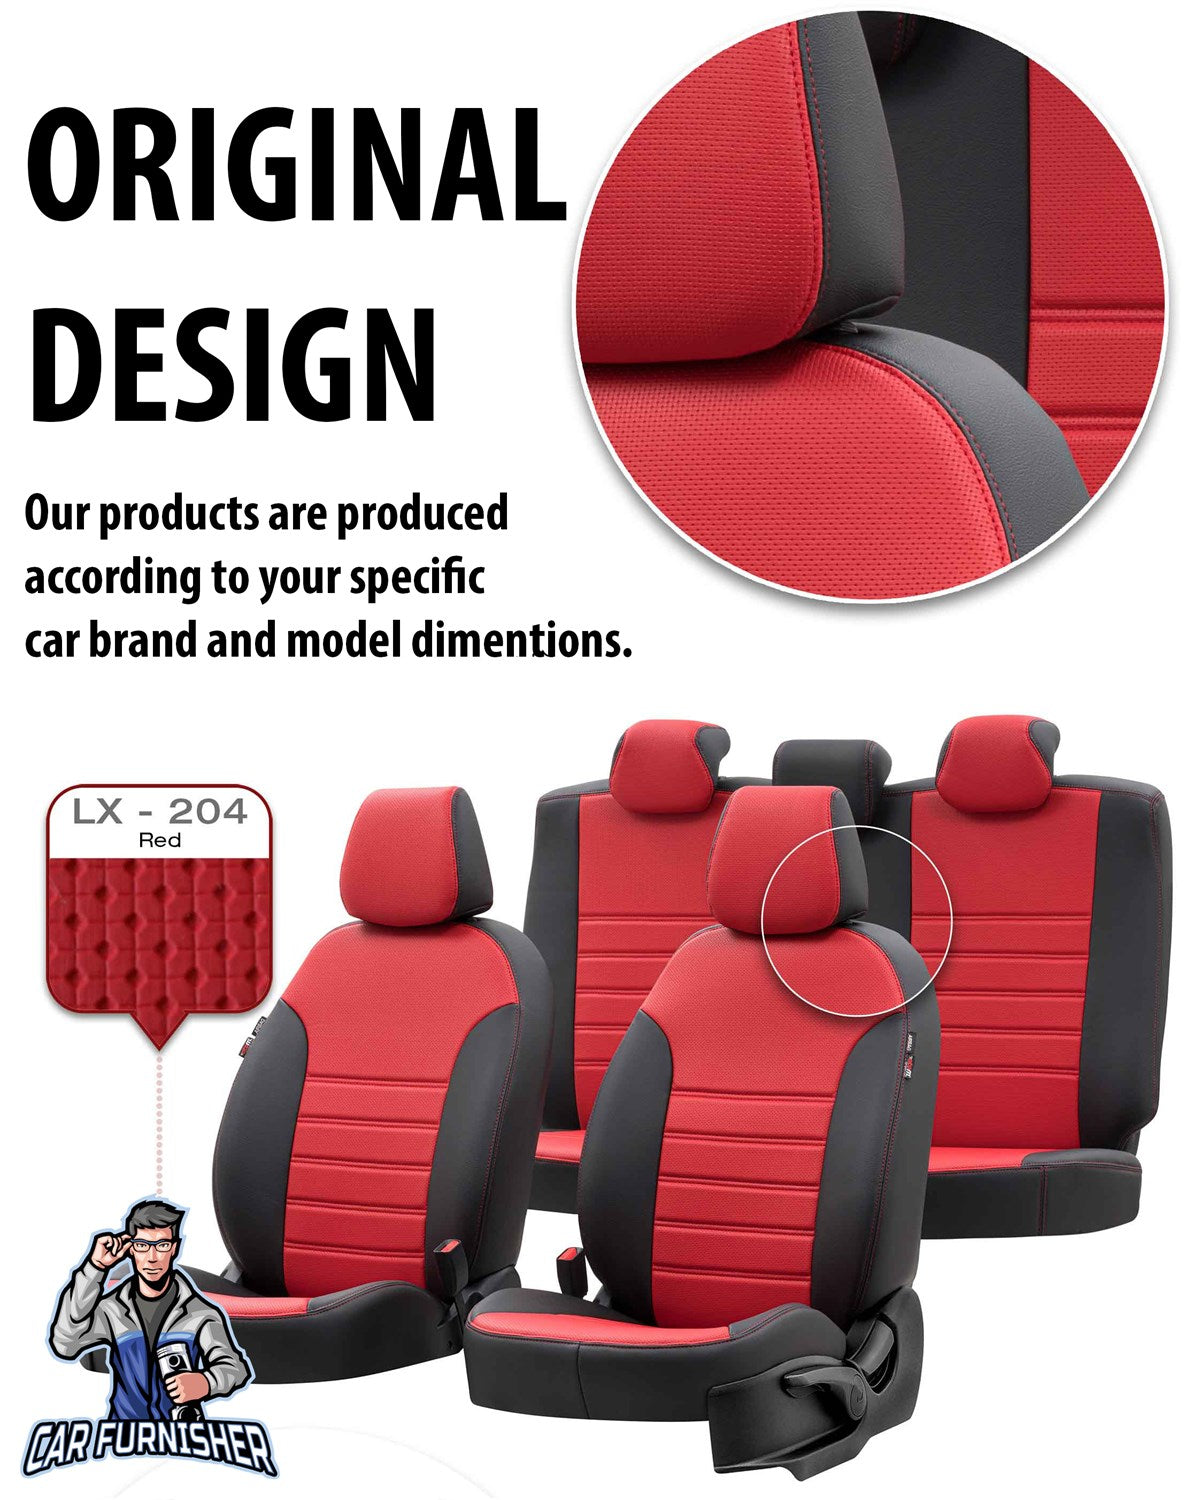 Opel Frontera Seat Cover New York Leather Design Black Leather